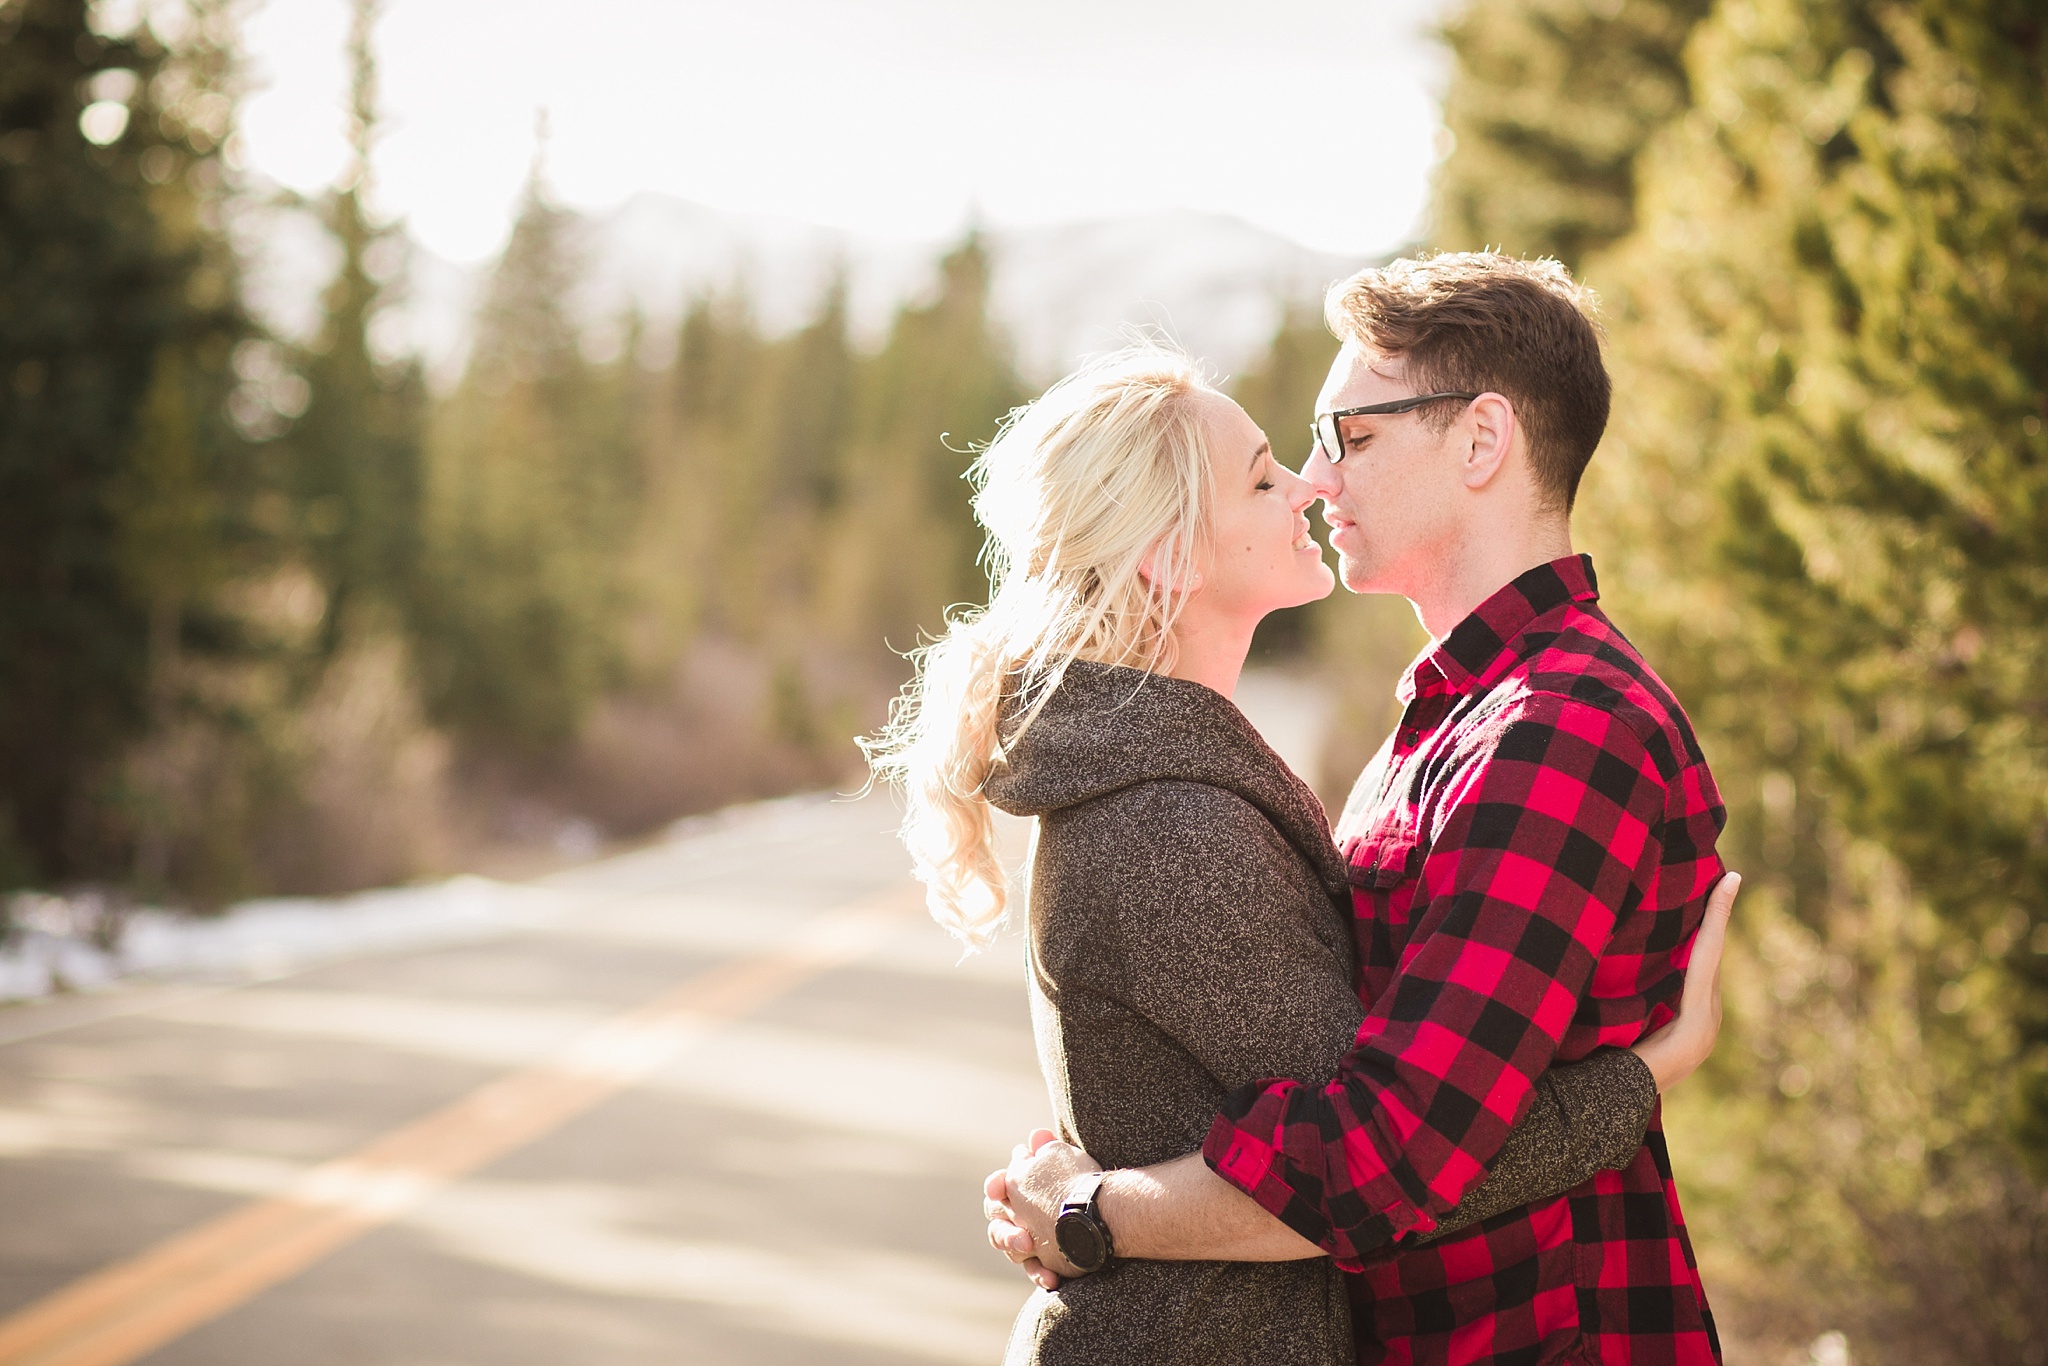 Couple kissing on a mountain road at sunset during their engagement session. Amy & Jonathan’s Brainard Lake Winter Engagement Session by Colorado Engagement Photographer, Jennifer Garza. Colorado Engagement Photographer, Colorado Engagement Photography, Brainard Lake Engagement Session, Brainard Lake Engagement Photos, Mountain Engagement Session, Colorado Winter Engagement Photos, Winter Engagement Photography, Mountain Engagement Photographer, Colorado Wedding, Colorado Bride